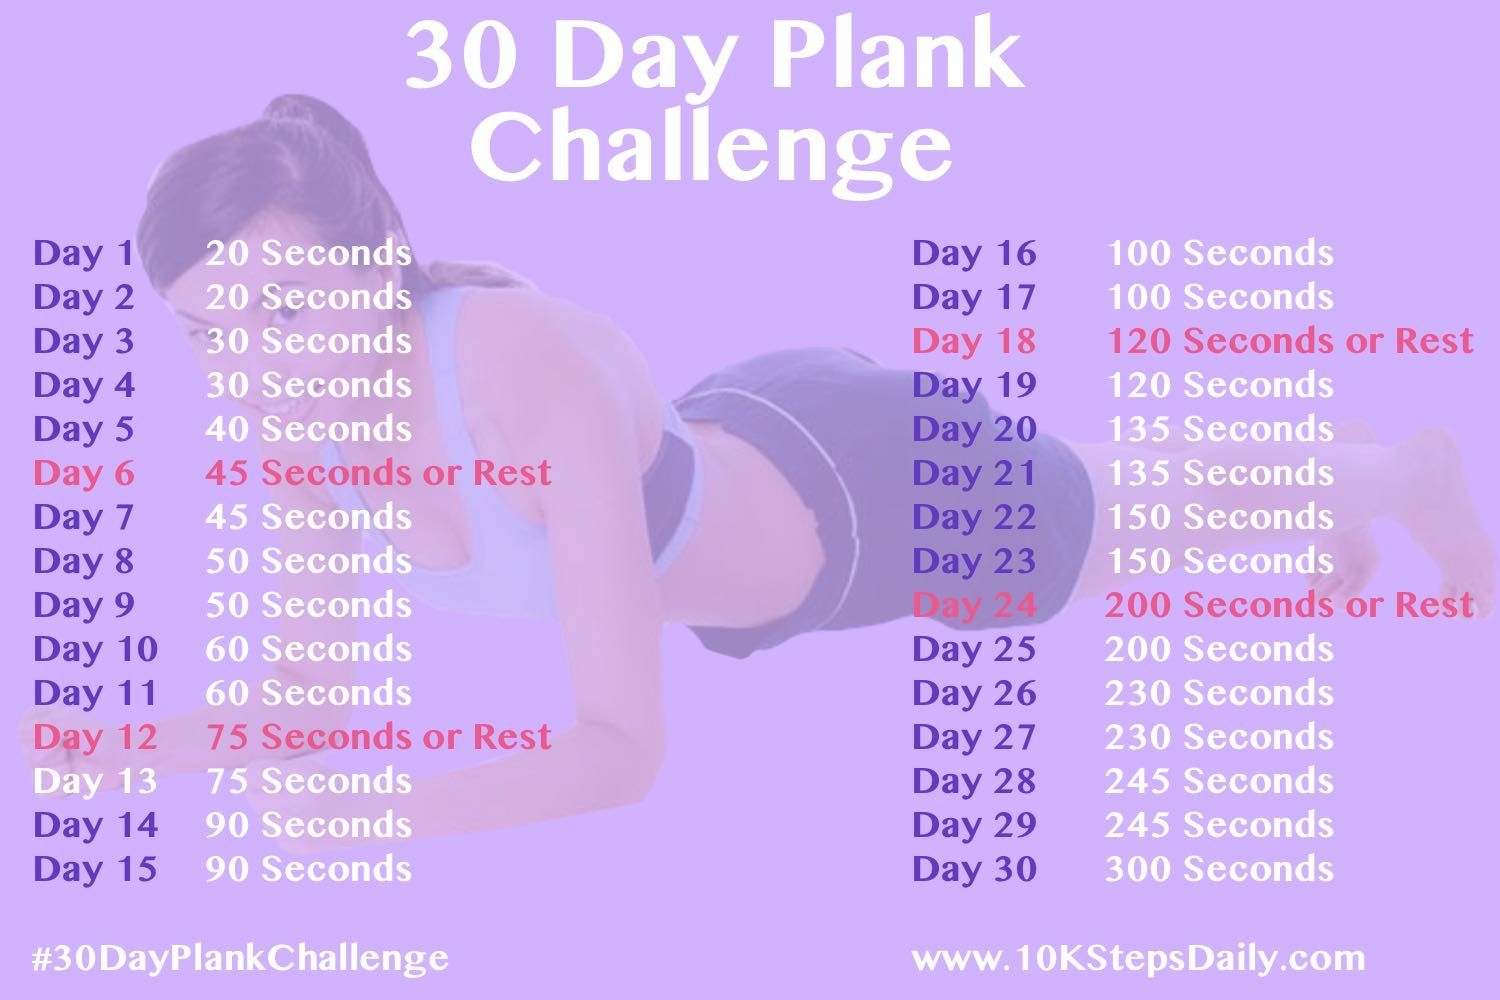 30 Day Plank Challenge - 10,000 Steps Daily